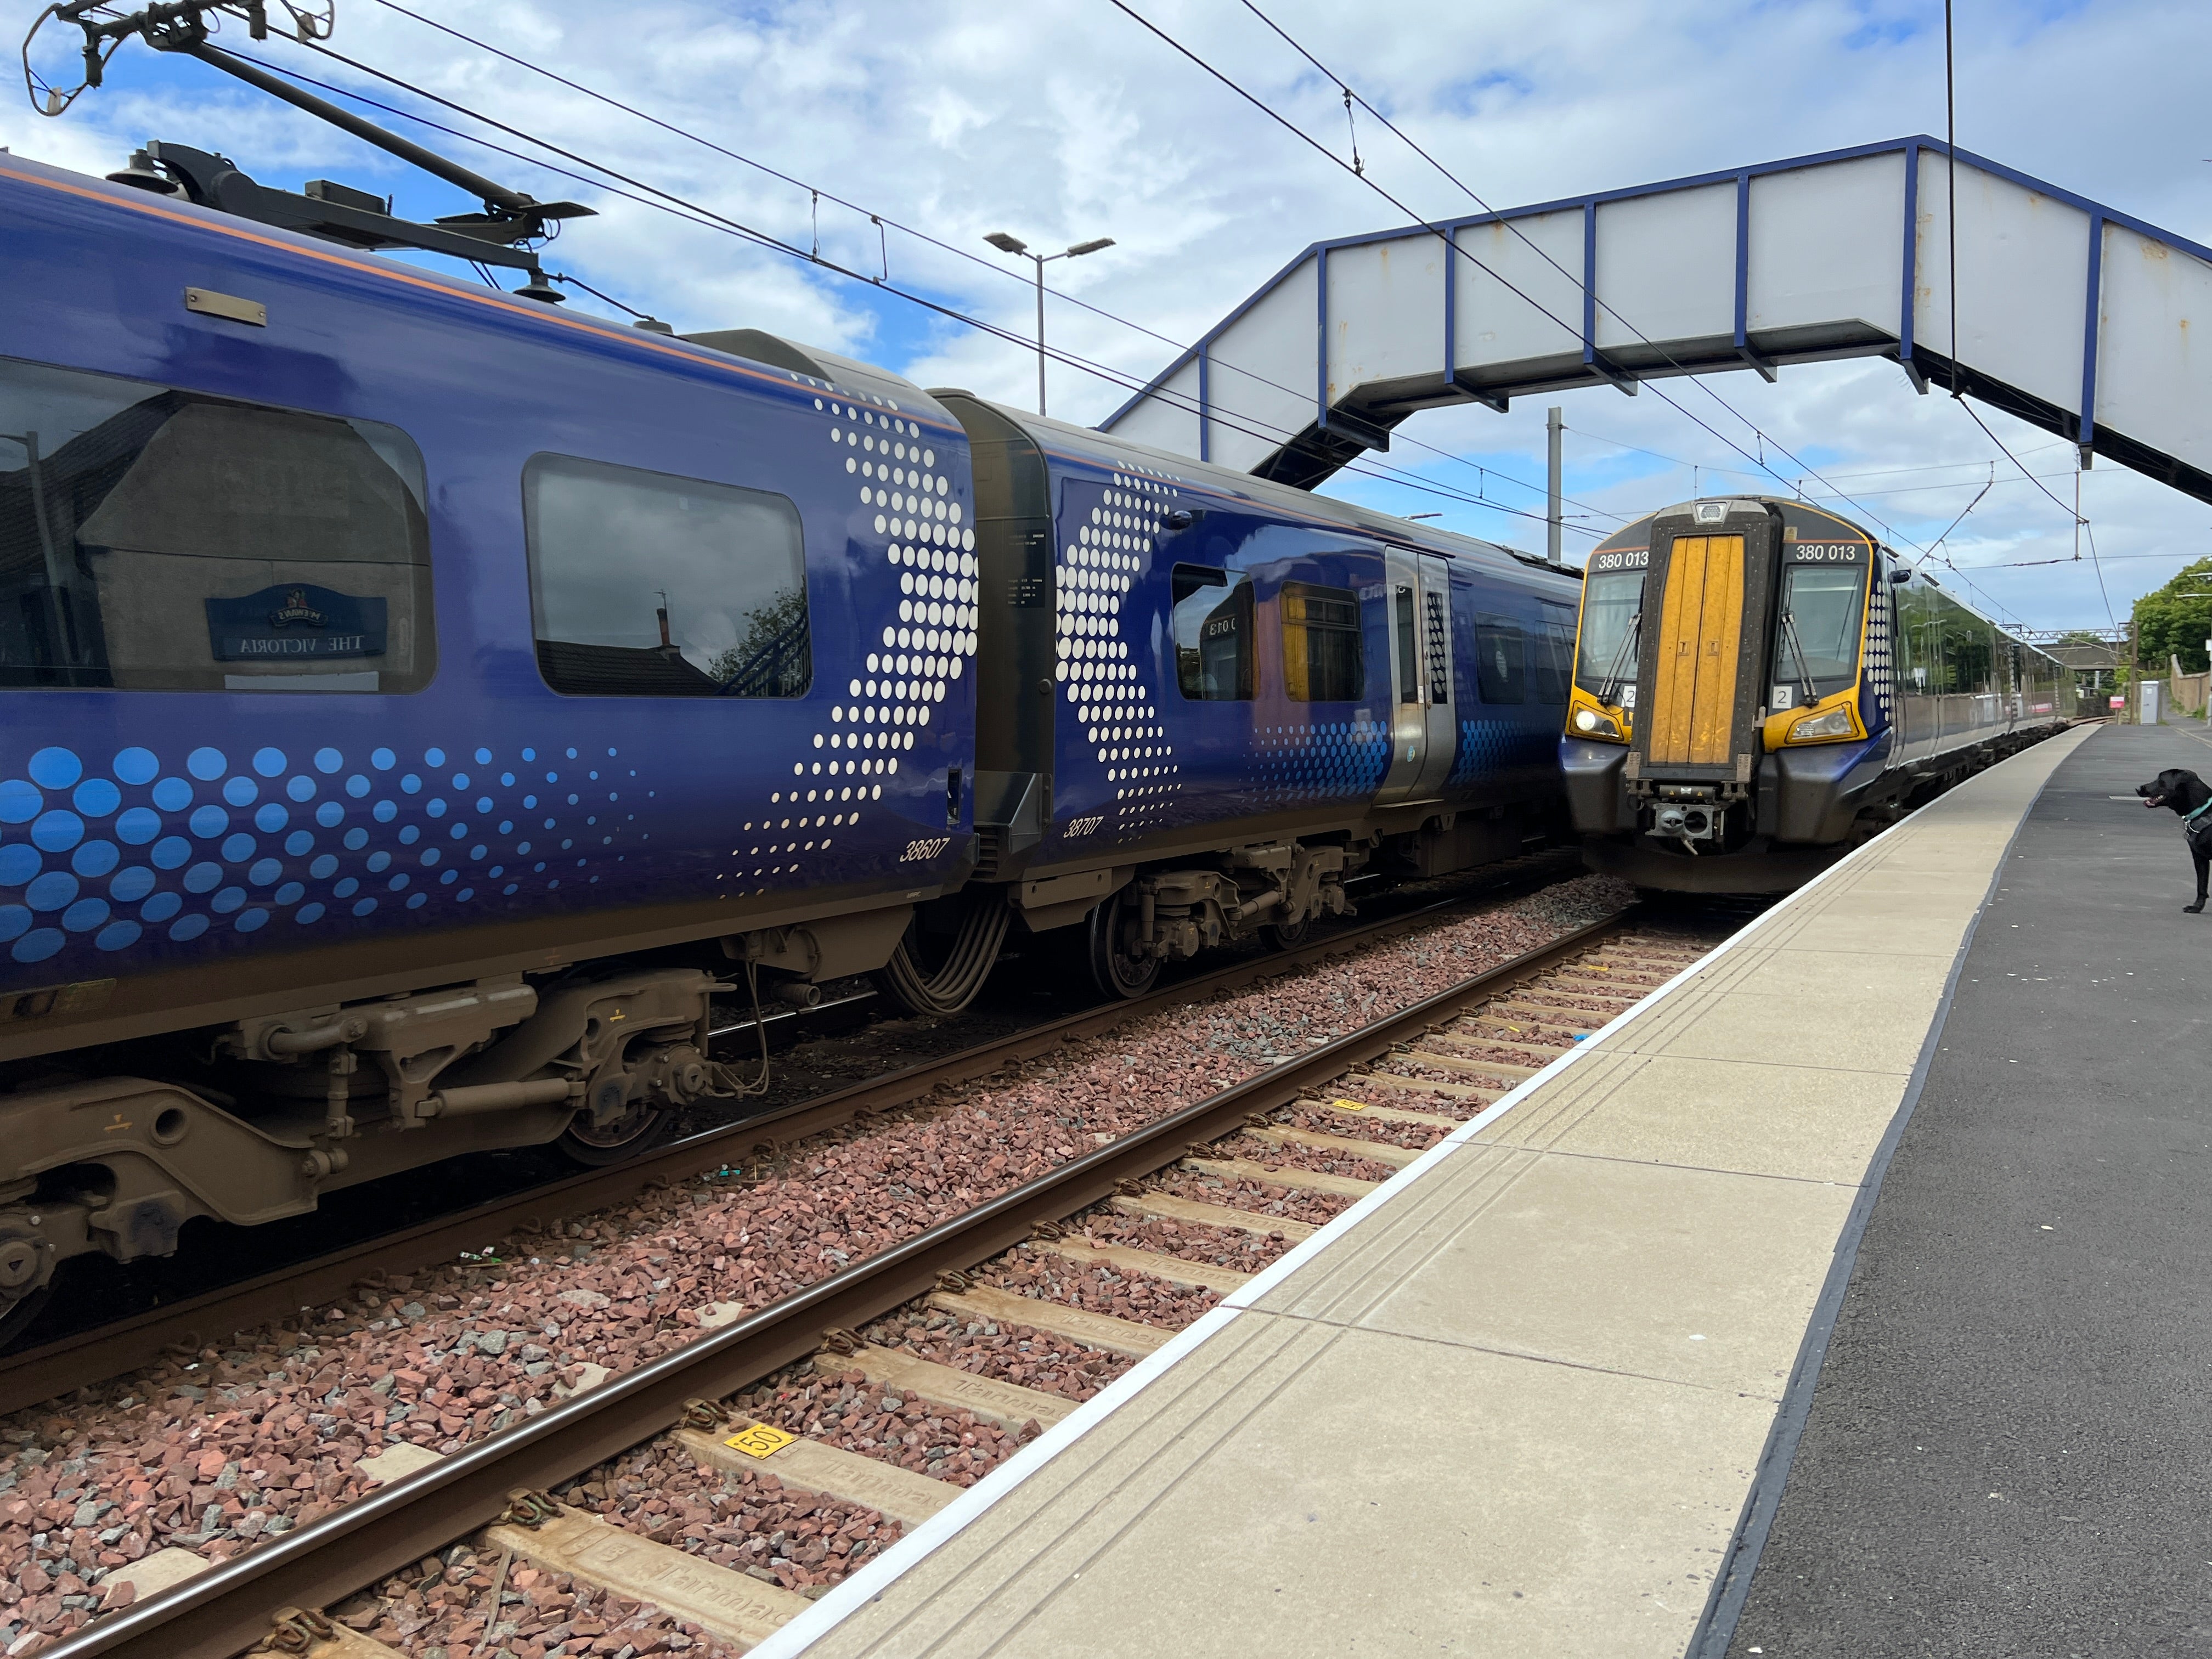 <p>Departing soon? ScotRail trains at Saltcoats station in Ayrshire</p>